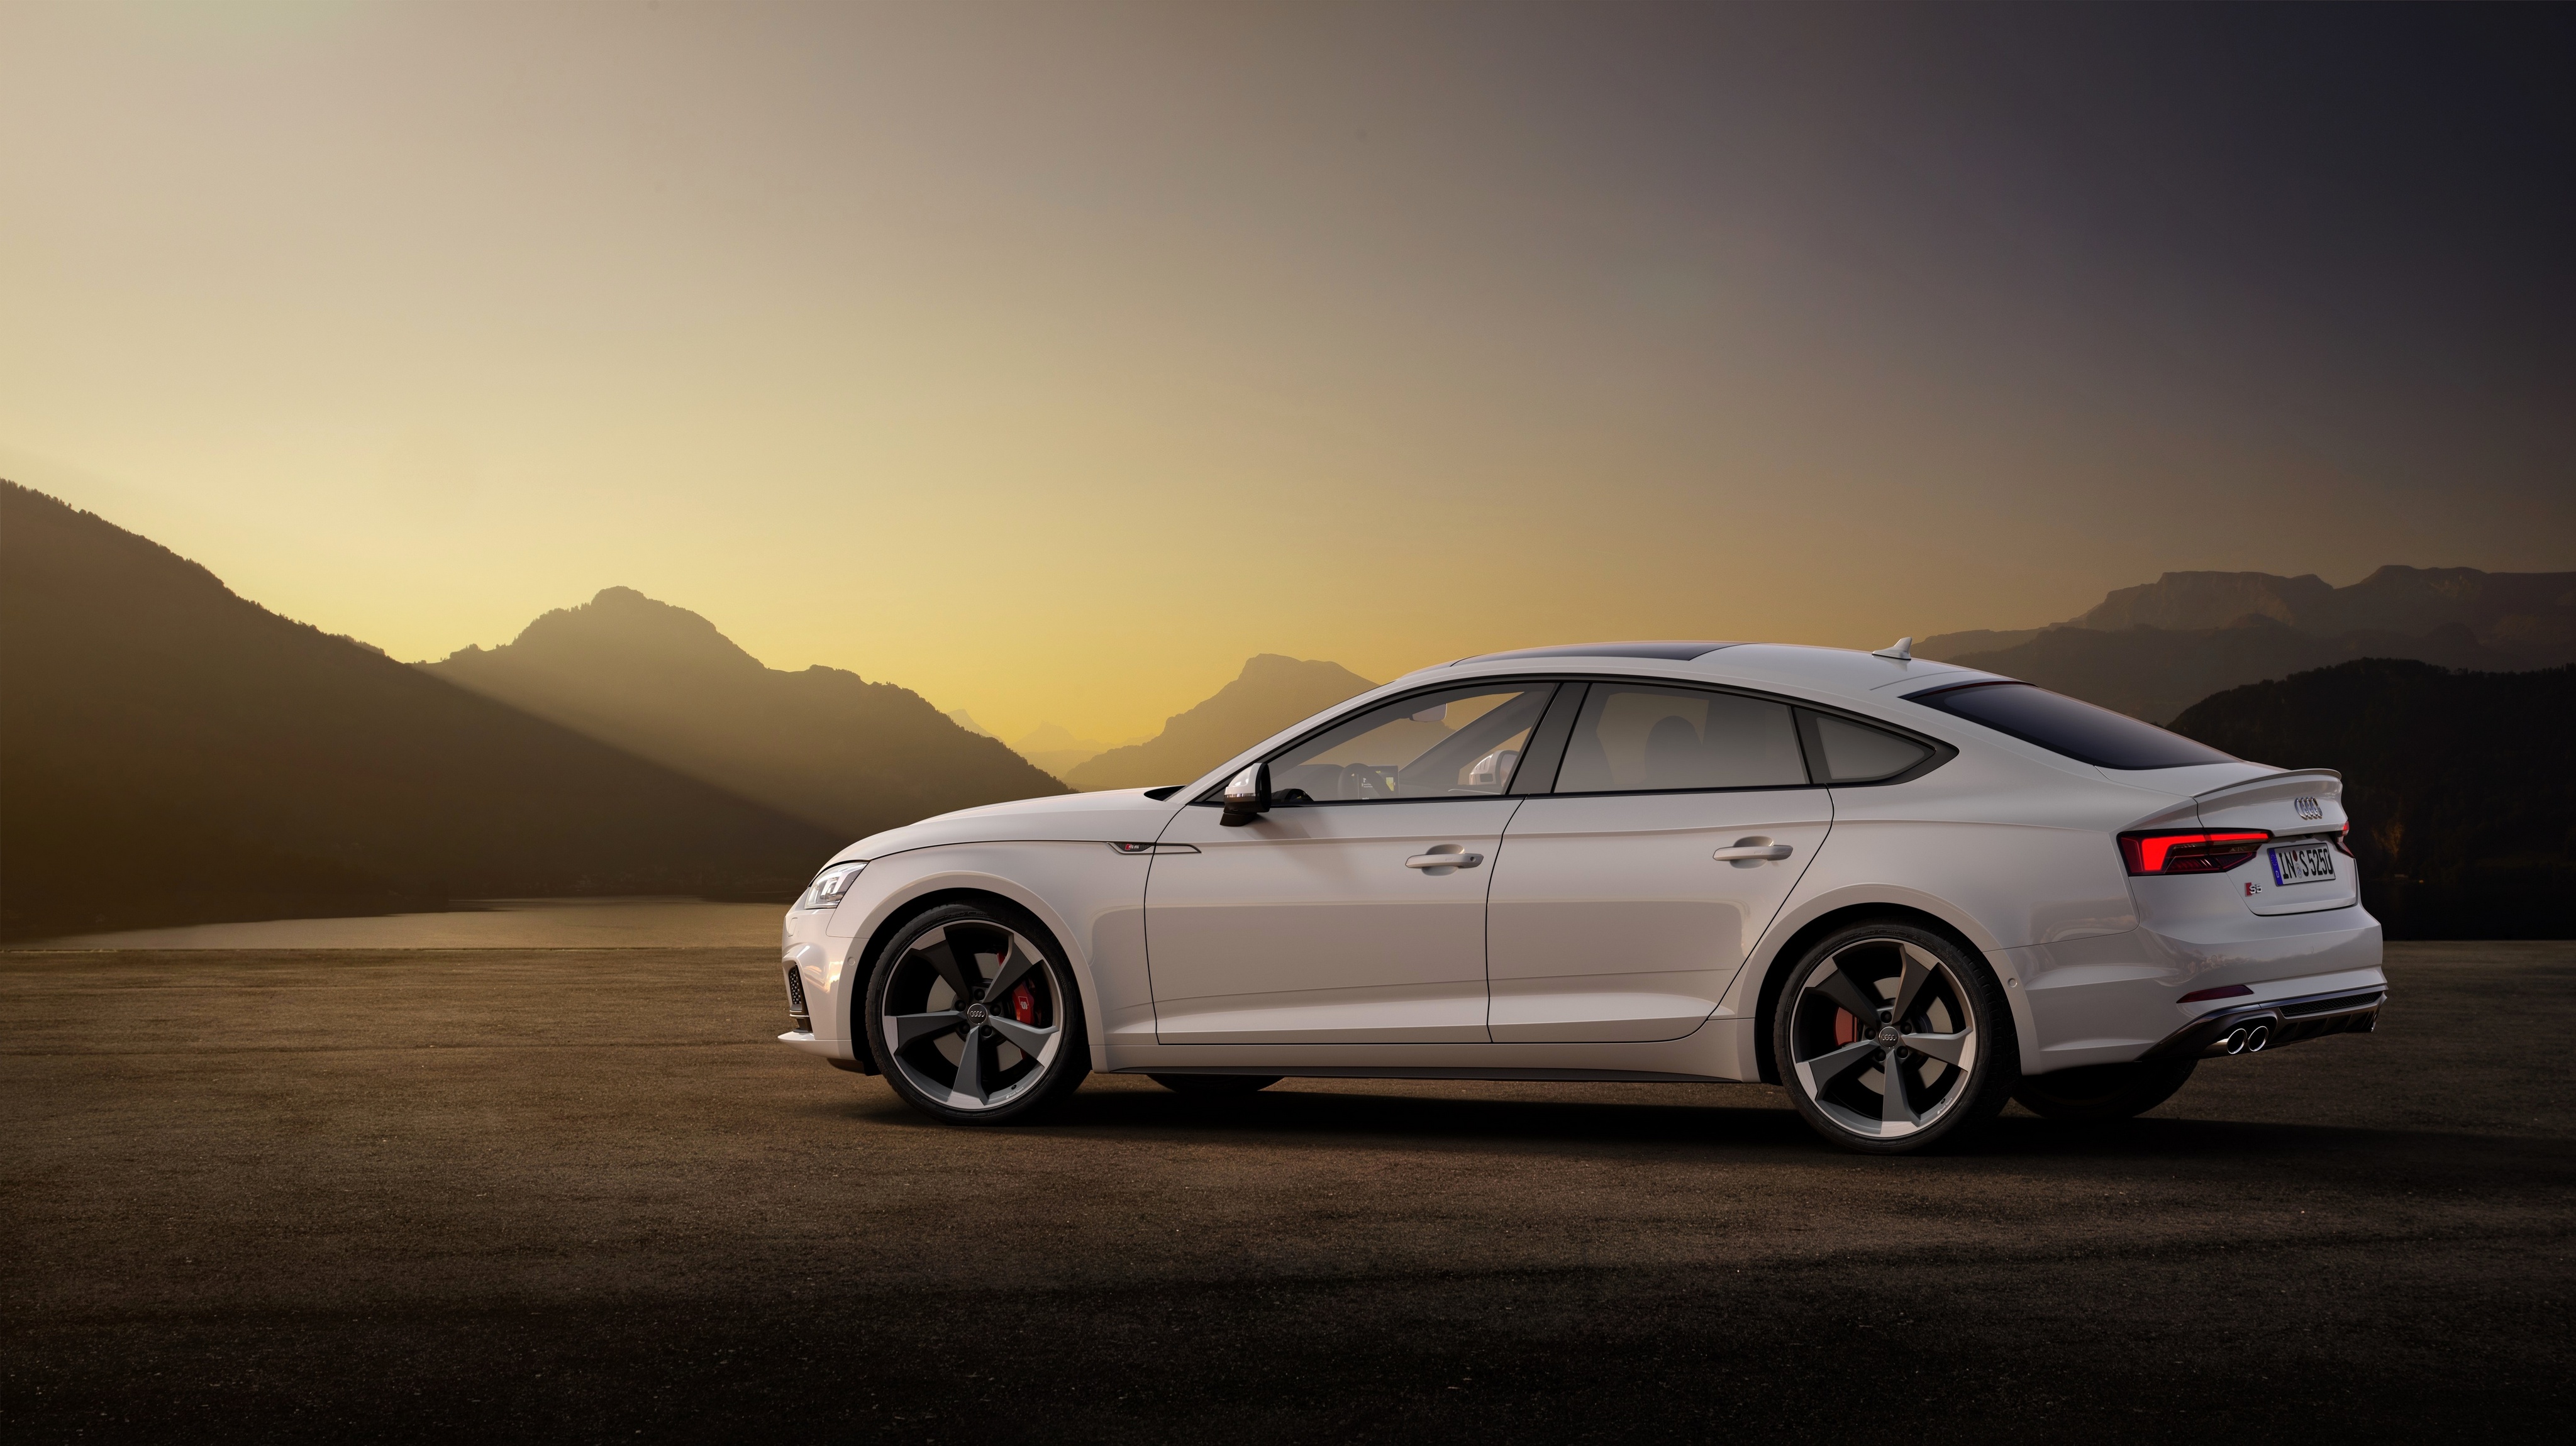 Audi A5 Wallpapers